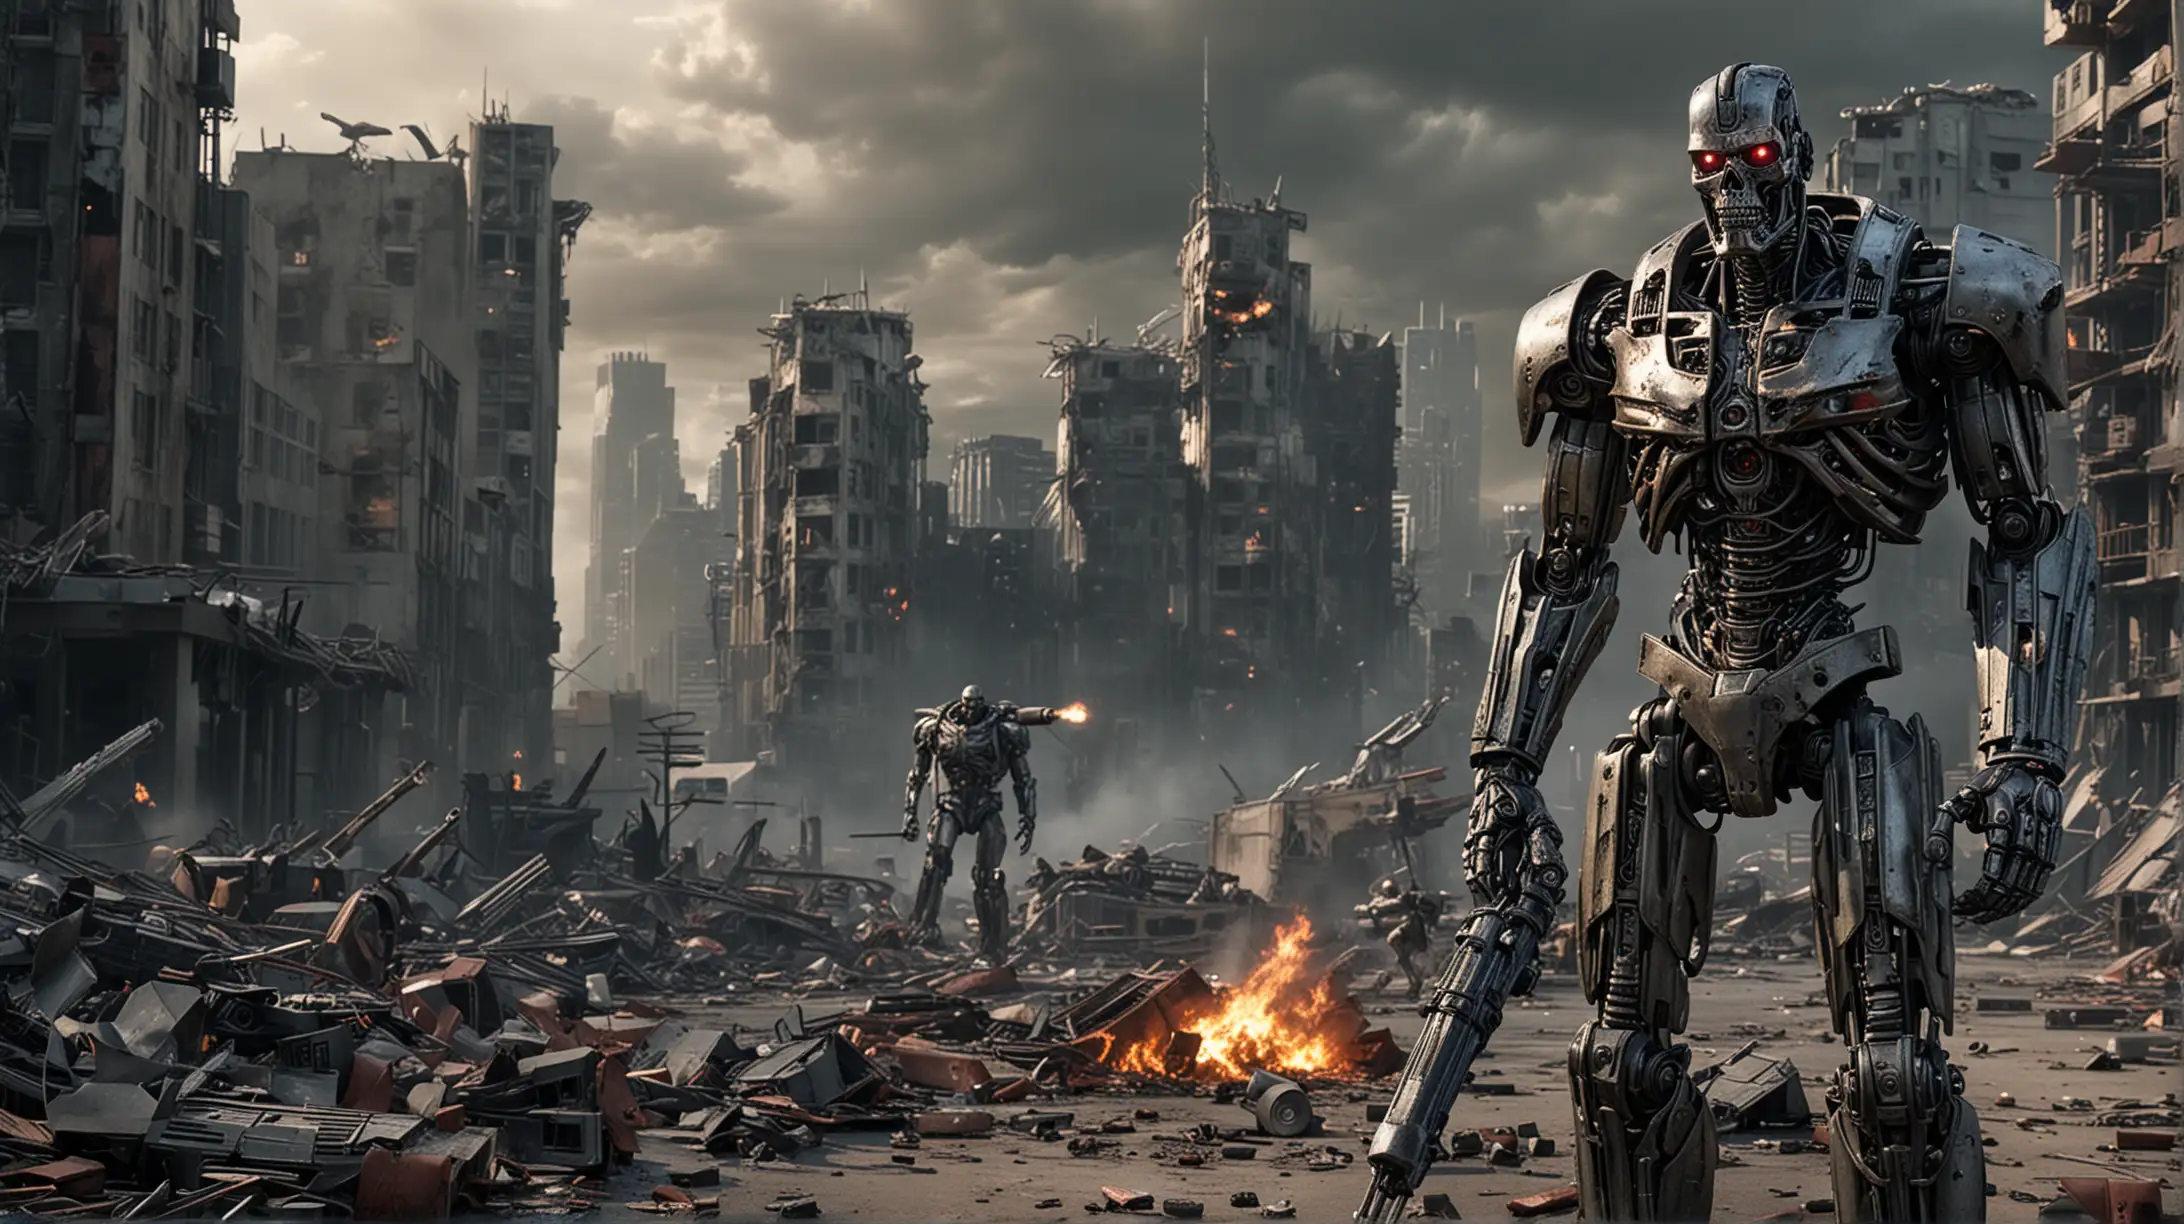 terminators have destroyed the city,